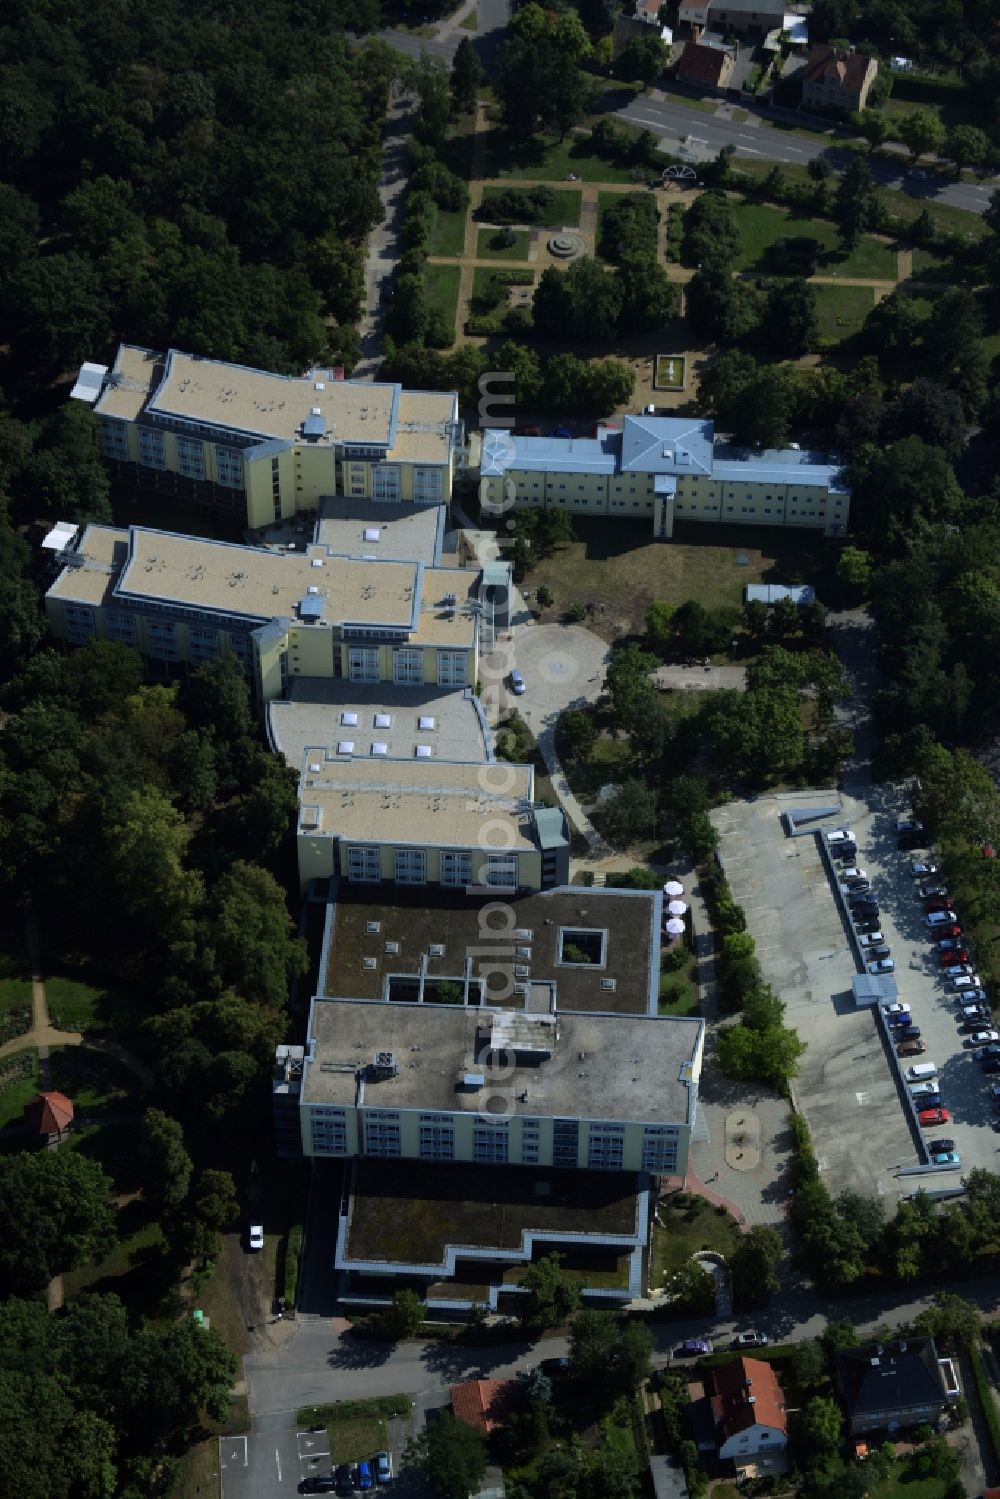 Bad Düben from the bird's eye view: Hospital grounds of the rehabilitation center of the clinic MediClin Waldkrankenhaus in Bad Dueben in the state of Saxony. The building complex and compound is located on Kur Park in the centre of the town